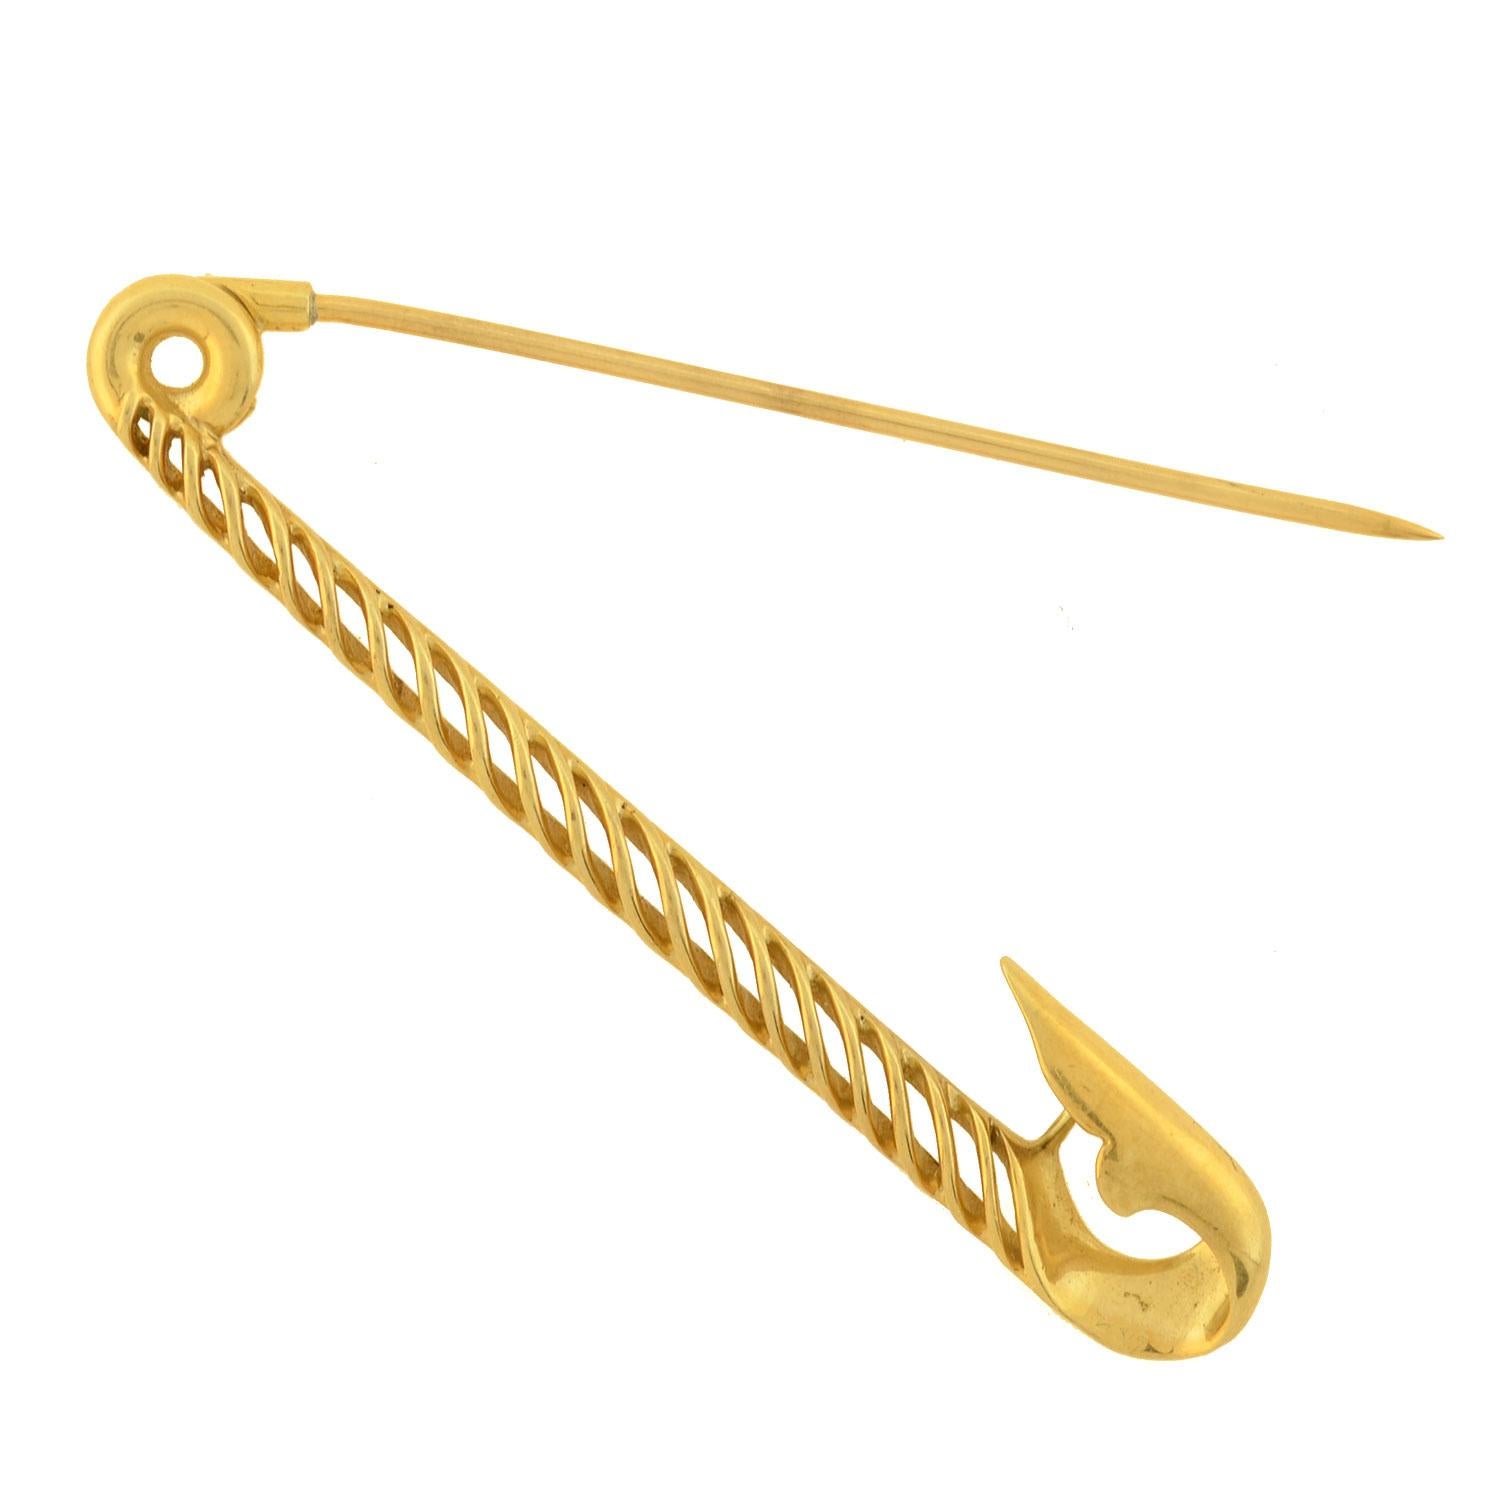 A fabulous Vintage safety pin by Tiffany & Co. from the 1960s era! Crafted in 18kt yellow gold, this large piece is designed as a fully functional safety pin, also referred to as a 